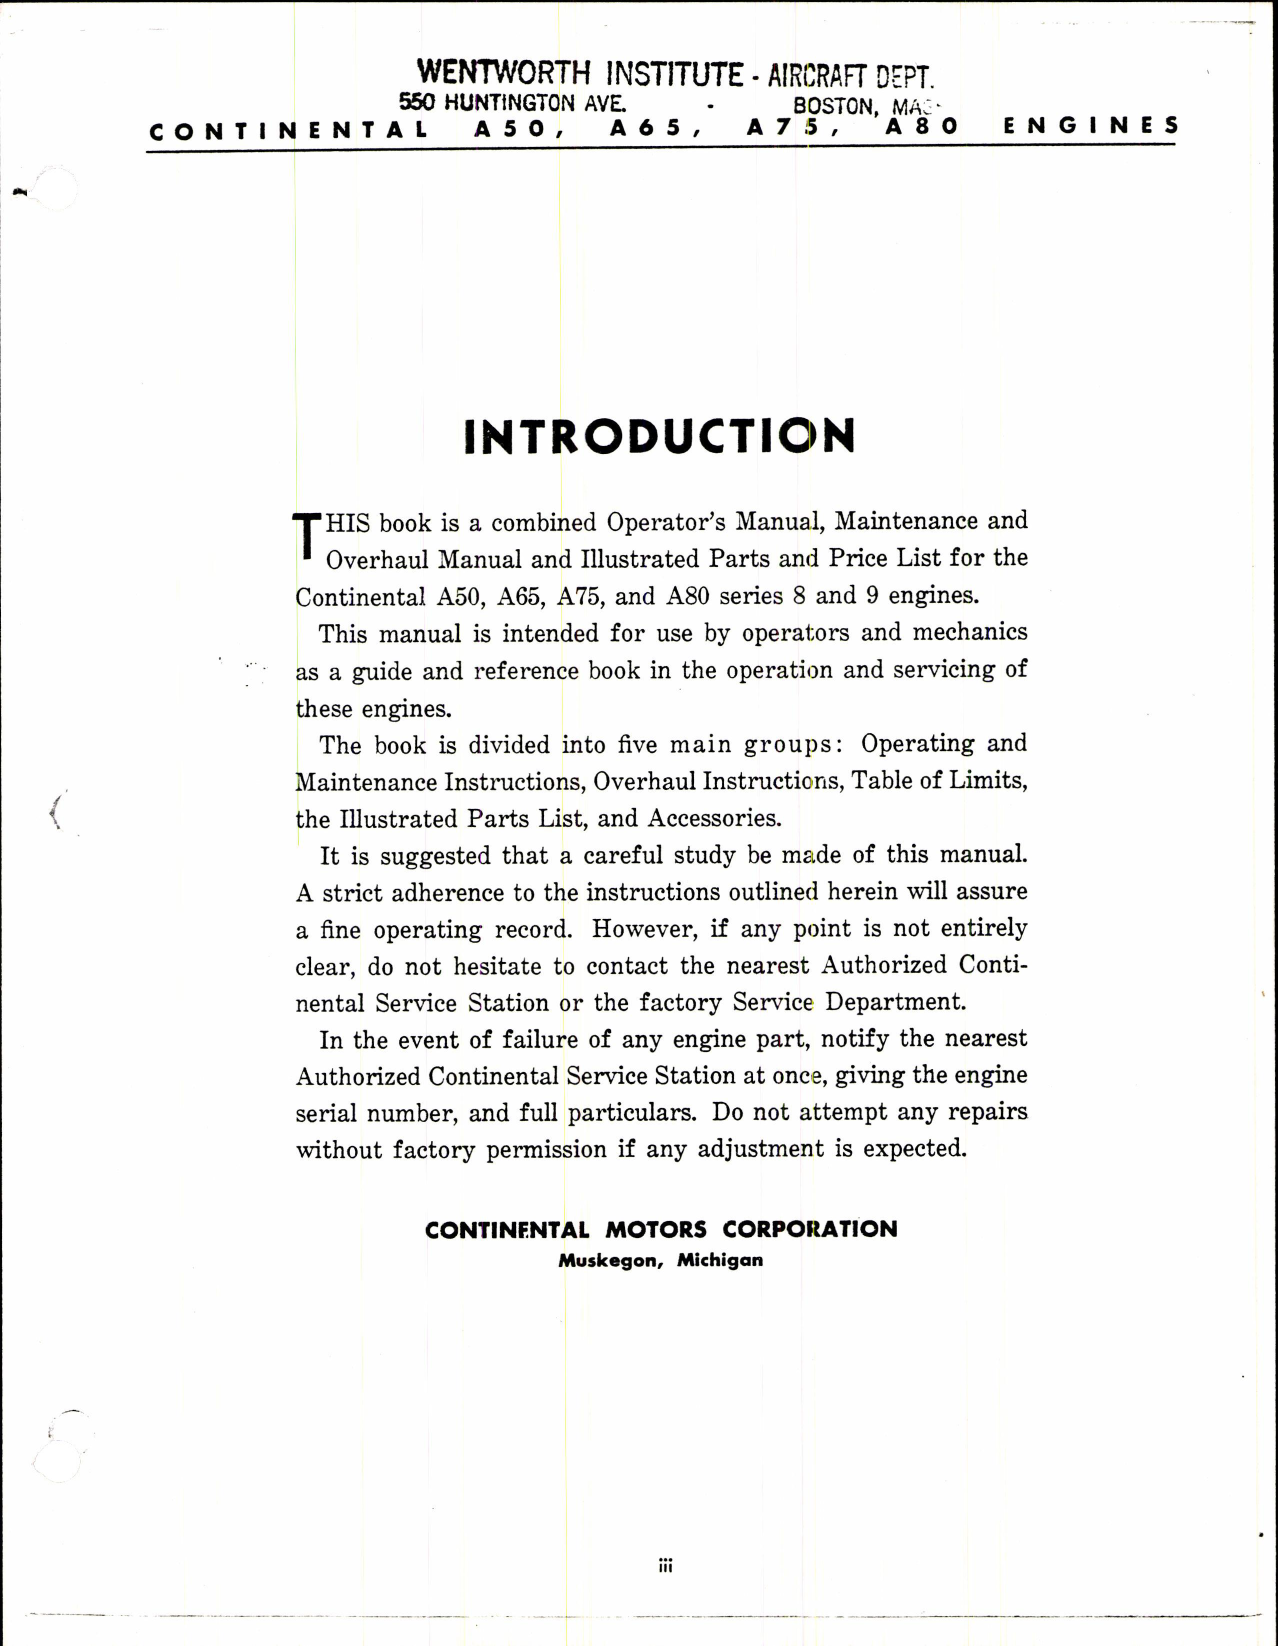 Sample page 2 from AirCorps Library document: Maintenance & Overhaul Manual for Continental Models A50